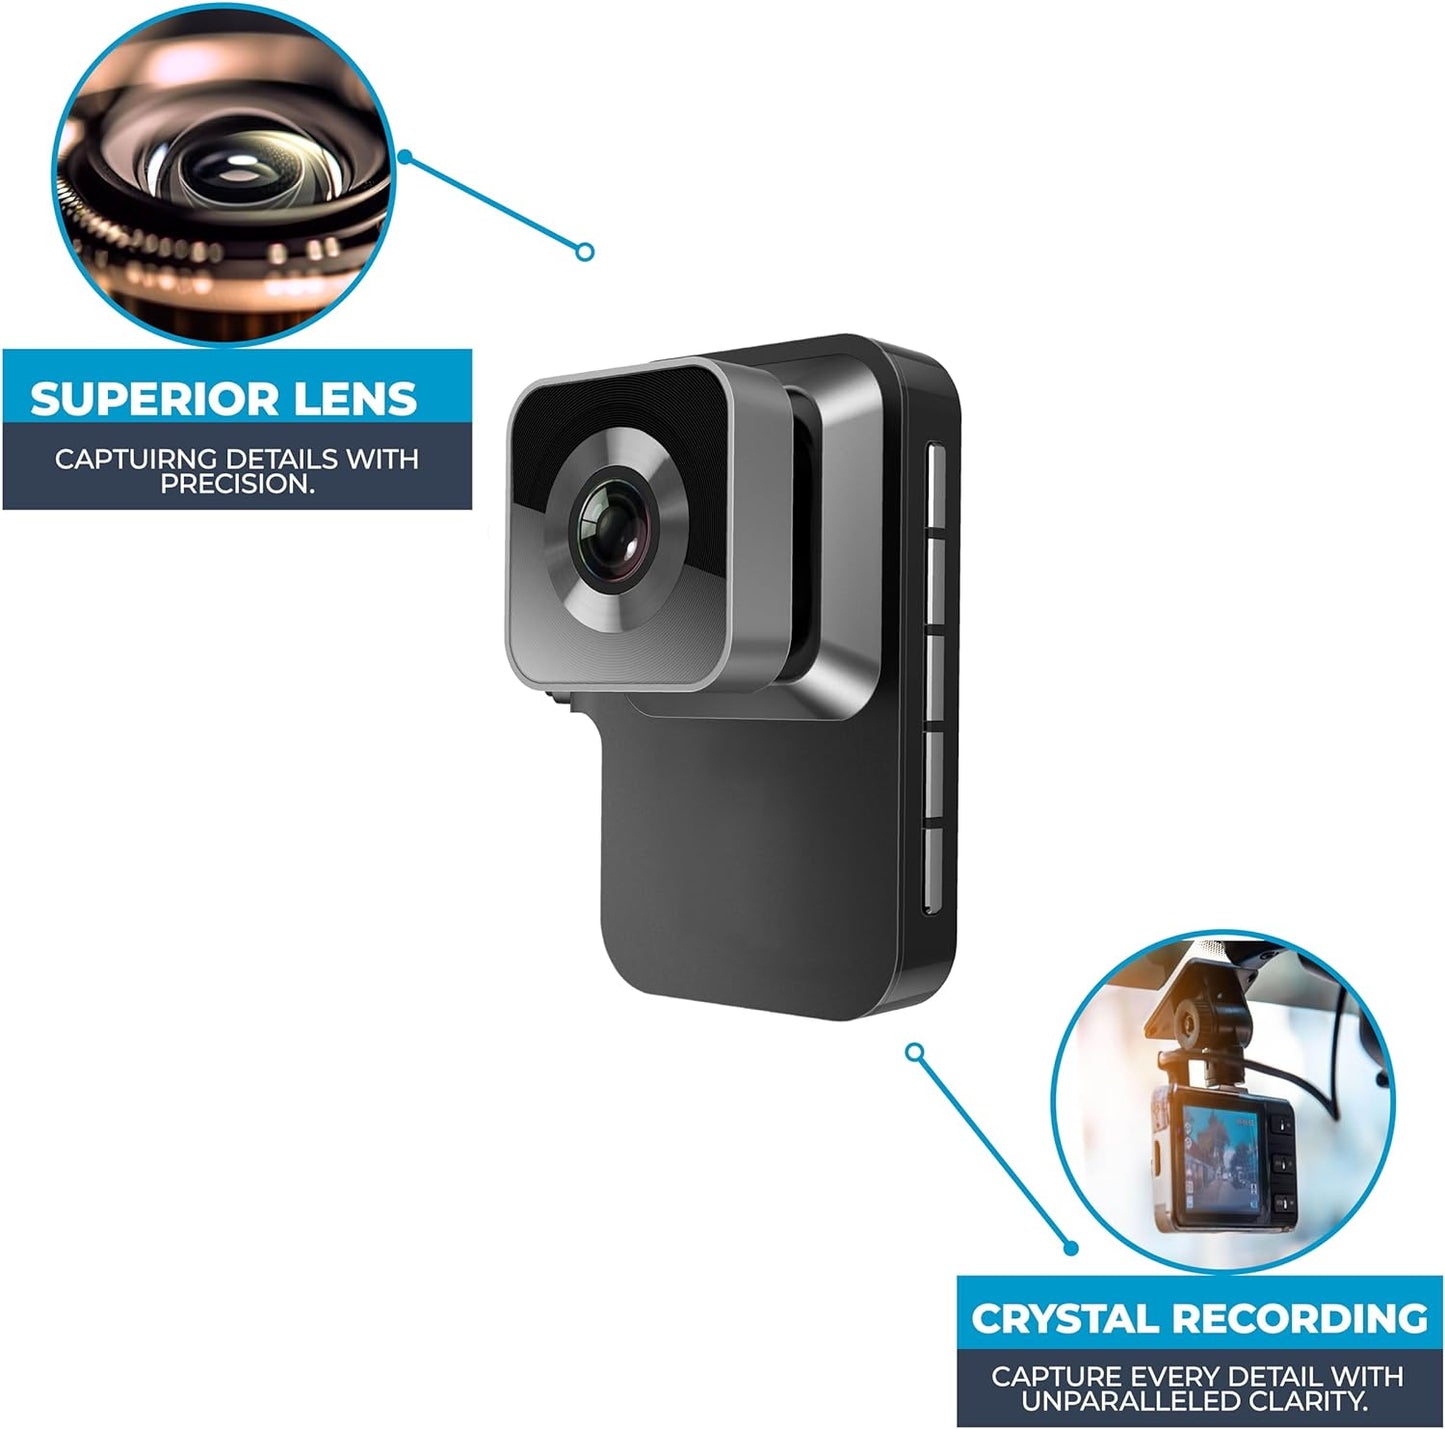 P1 Autocare DASHCAM Super HD - Front & Rear recording - 170-degree angle- HDR 3.0 inch LCD display